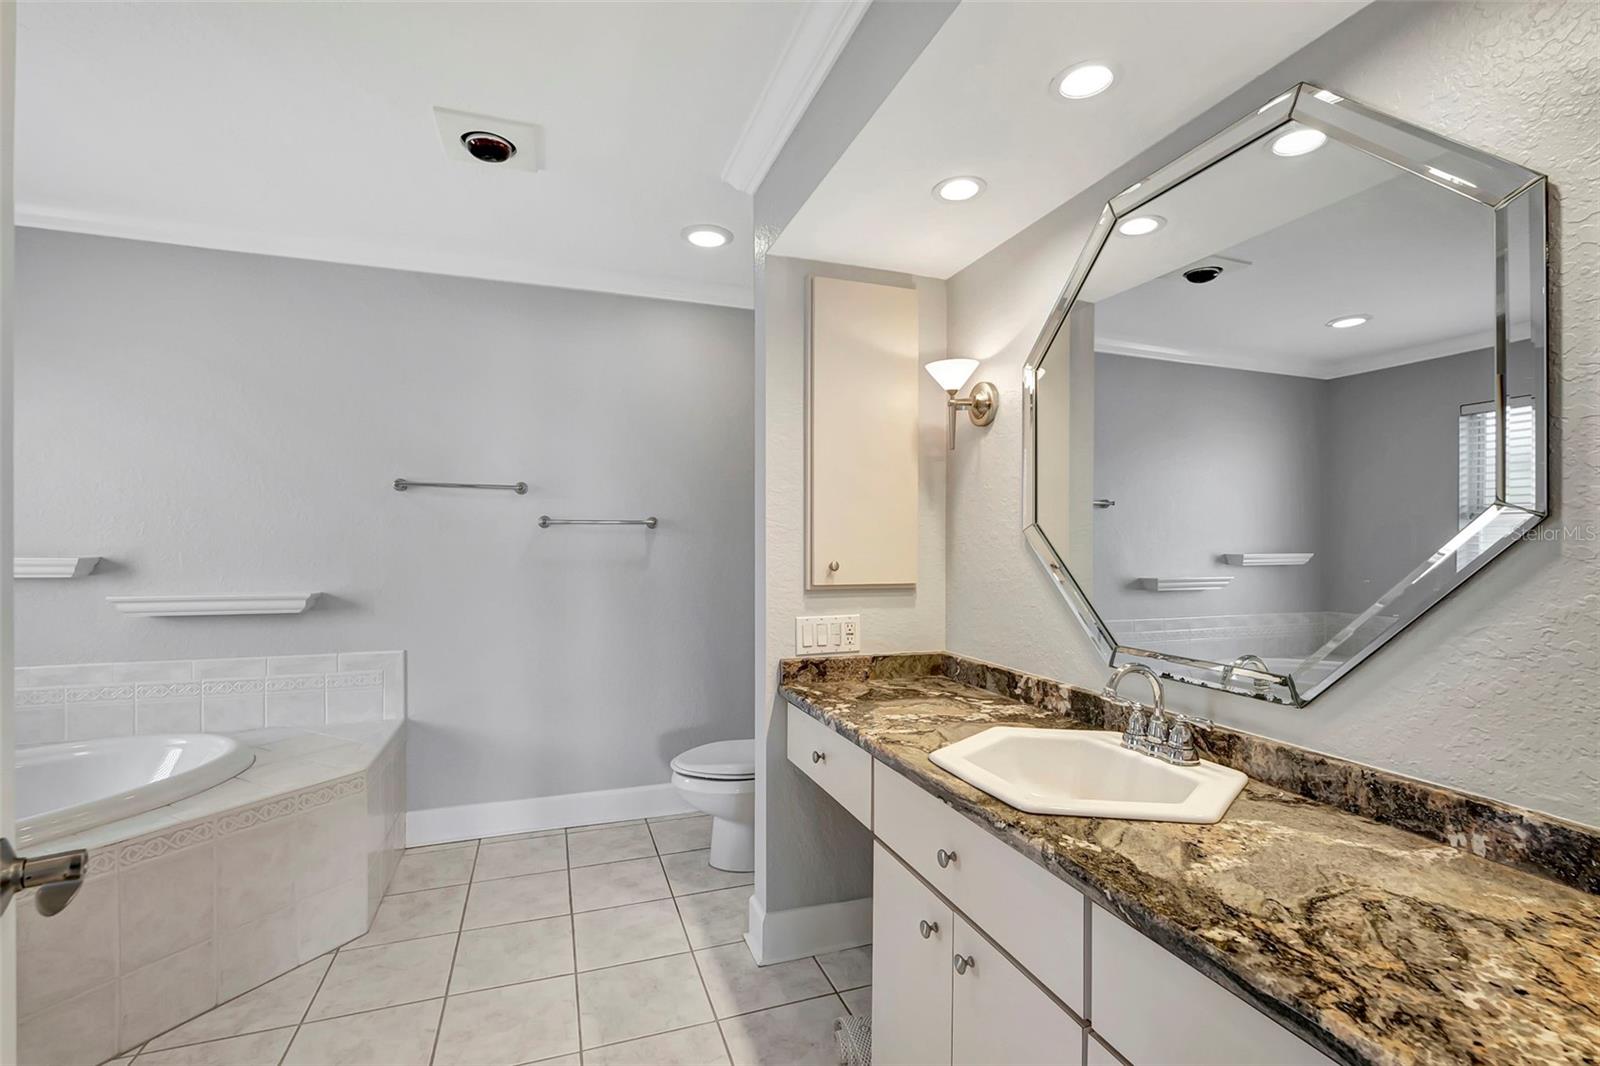 Welcome to the master bathroom, featuring a luxurious tub, stylish sink, spacious mirror, and plenty of cabinets for storage.